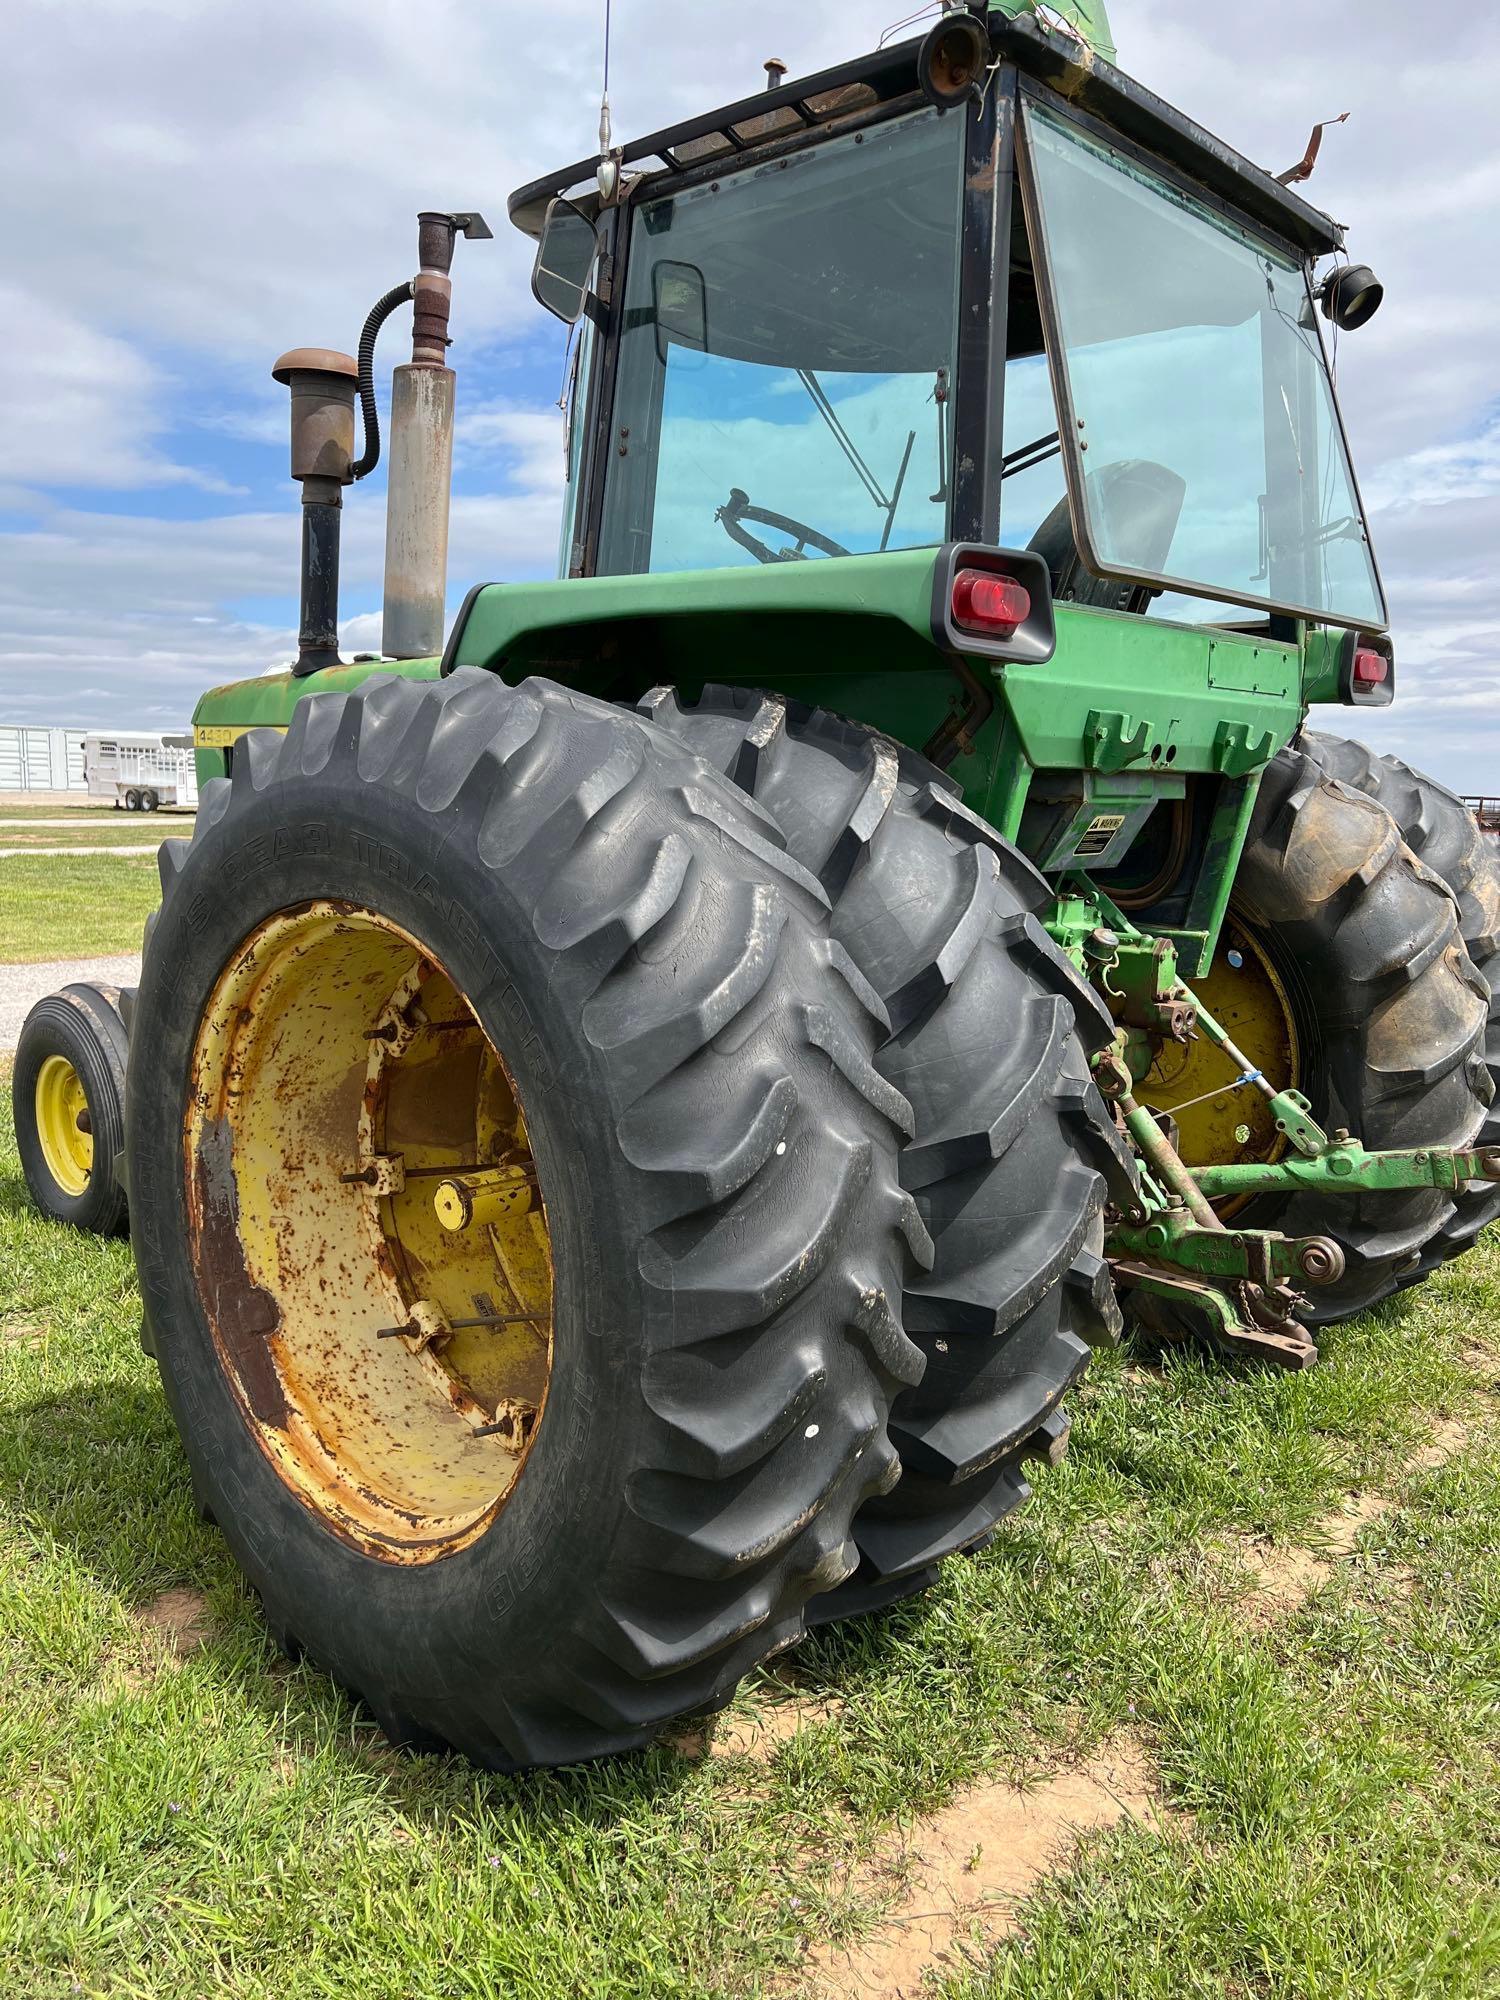 JOHN DEERE 4430 TRACTOR 2468 HOURS POWER SHIFT TRANSMISSION EQUIPPED WITH FRONT WEIGHTS AND DUALS